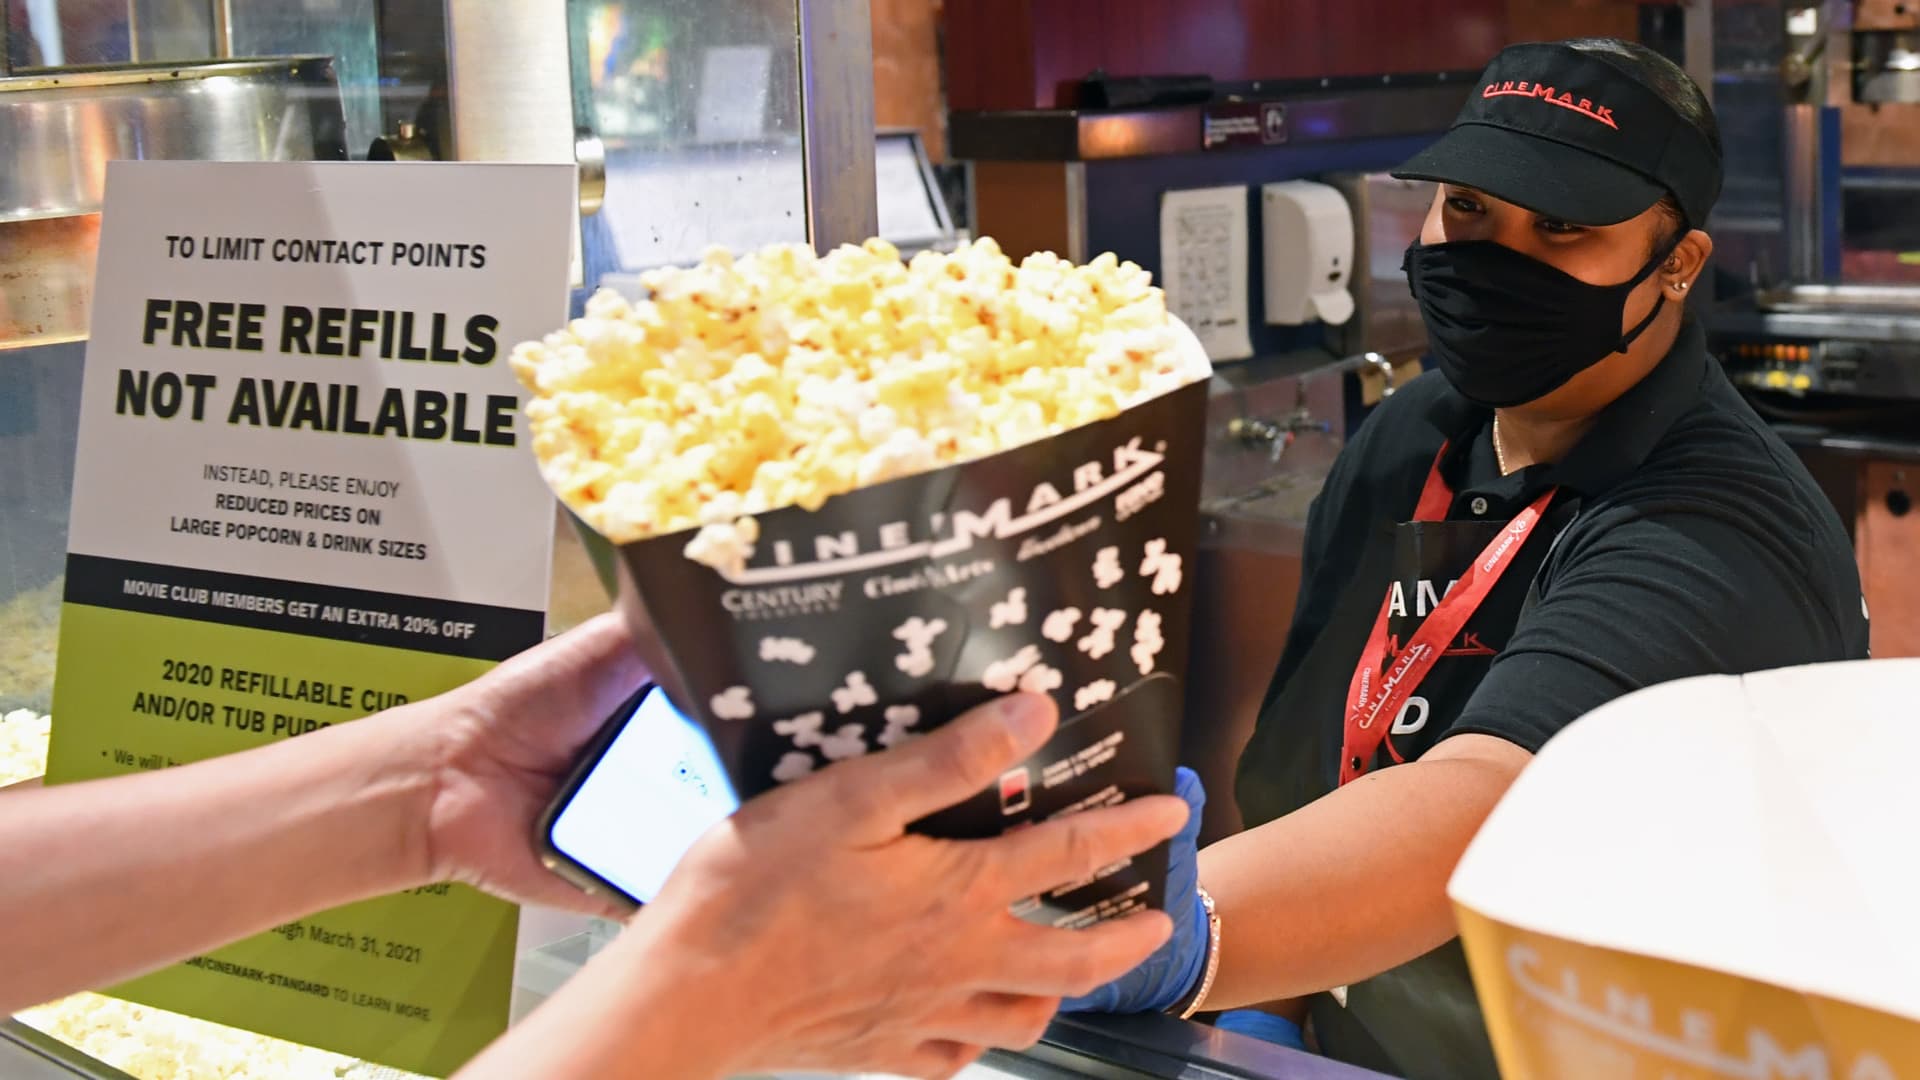 Movie theaters get creative with food and drink as they struggle to fill seats